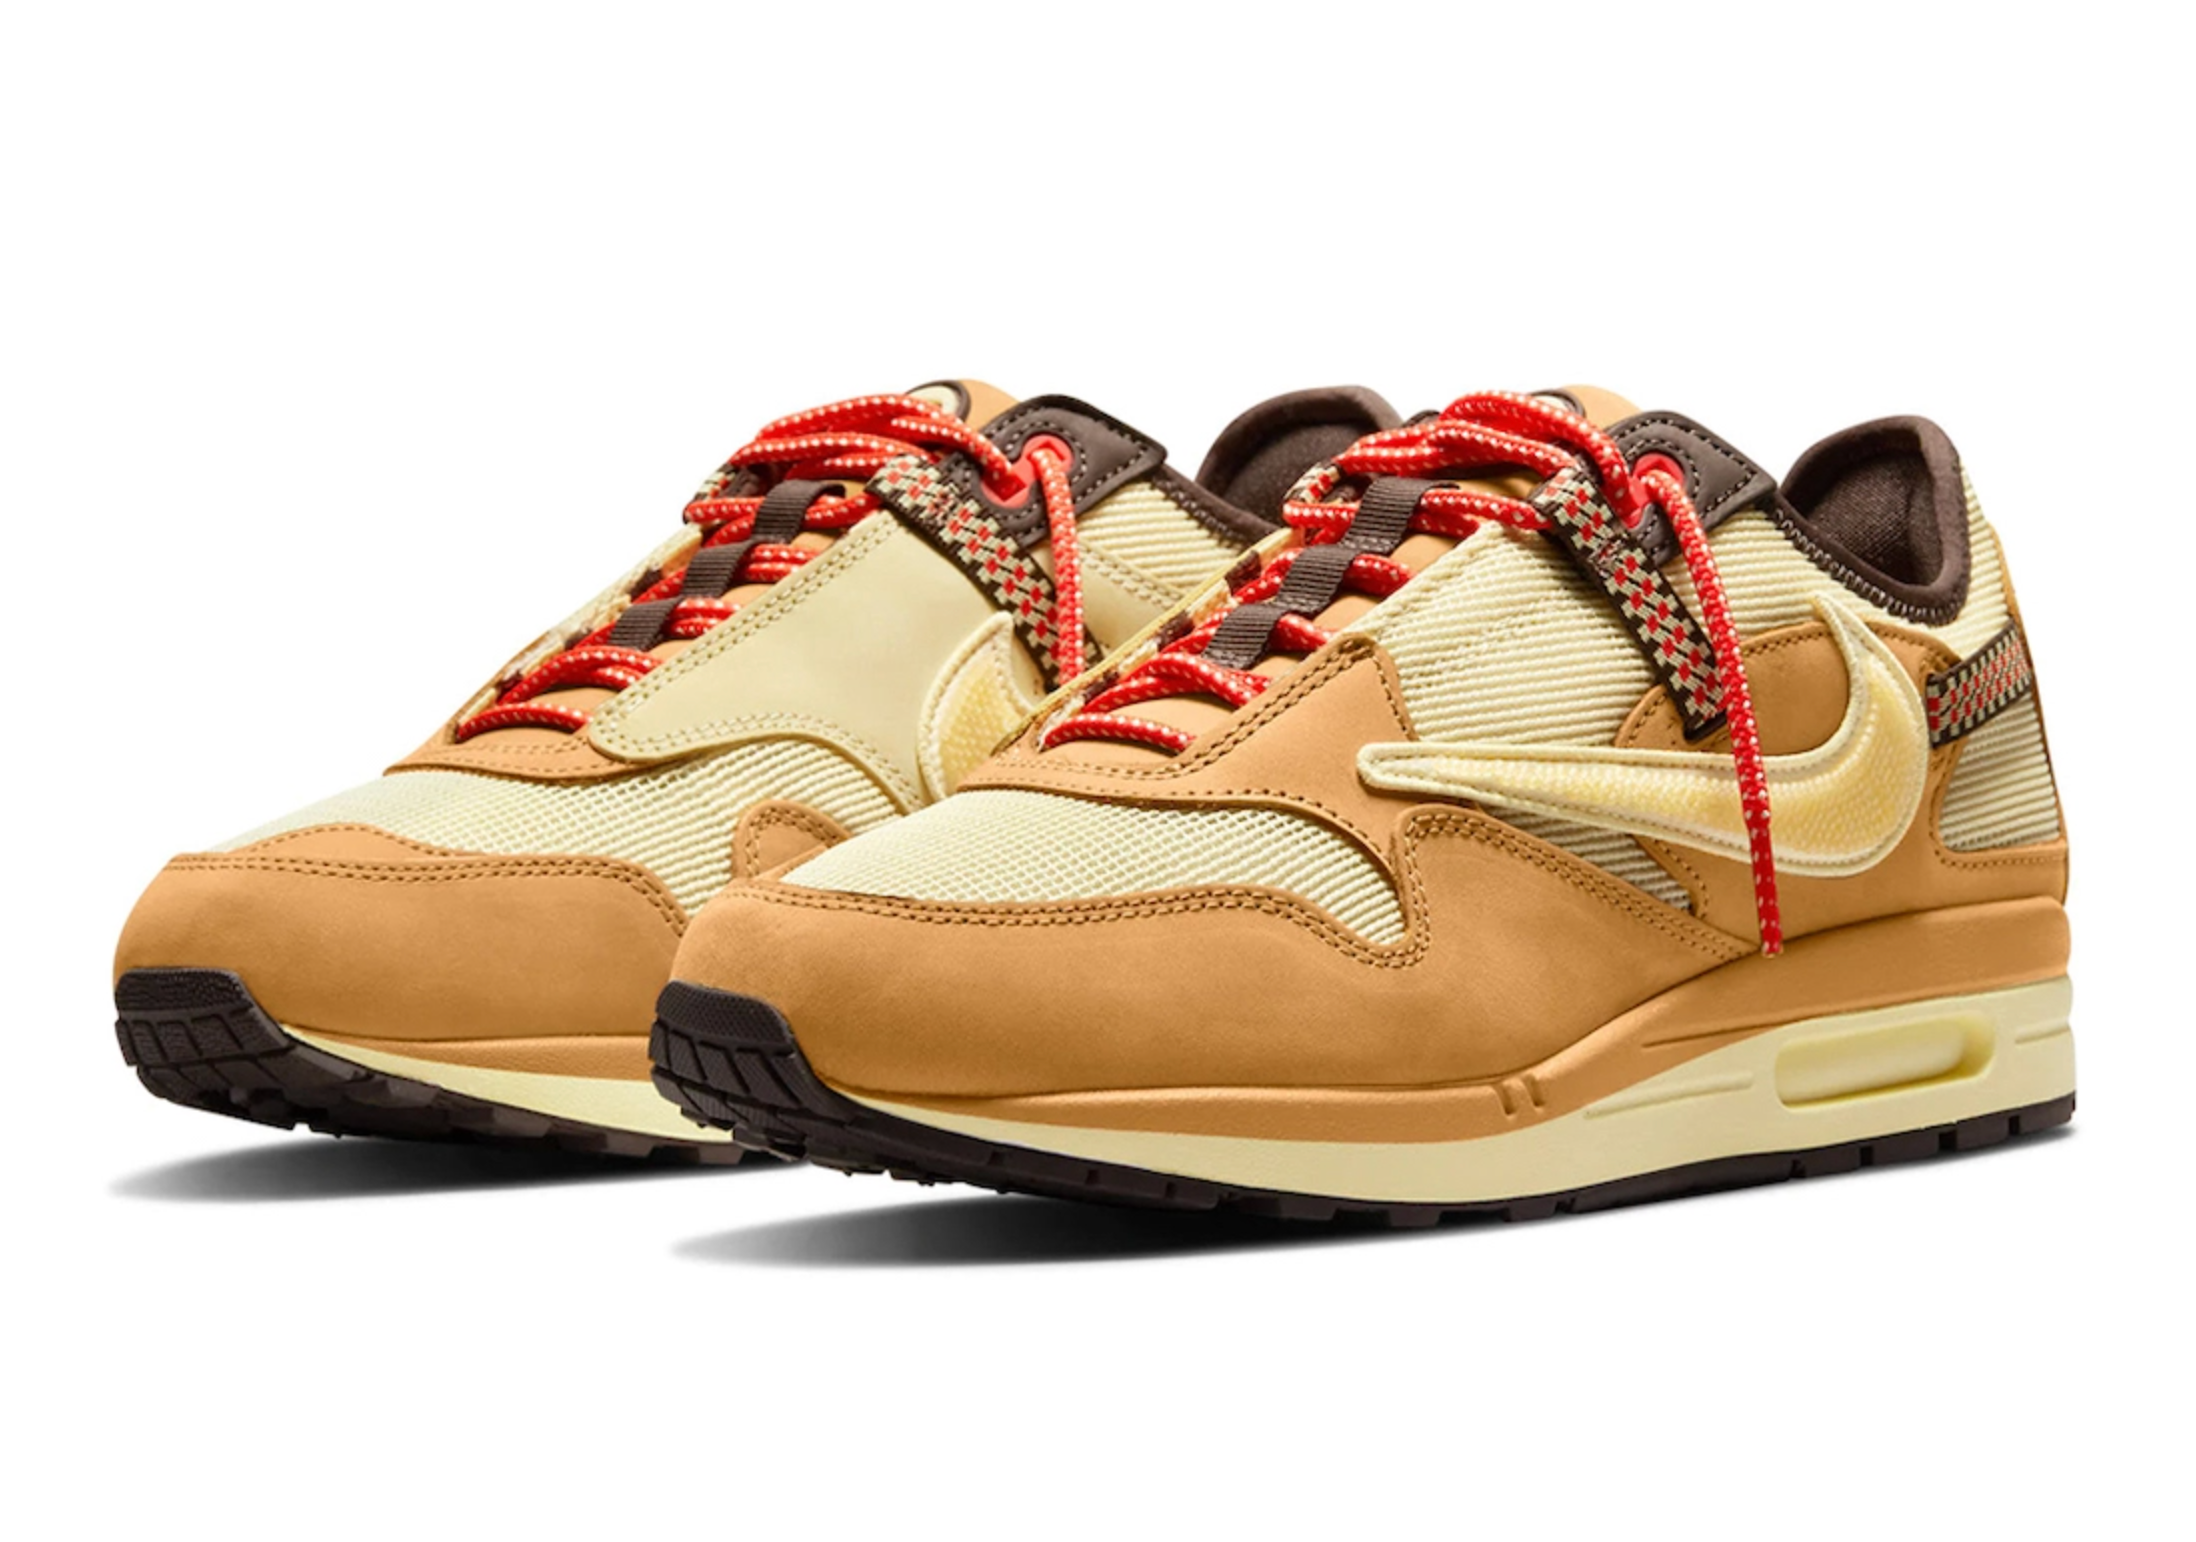 Revealed and Sold Out! Travis Scott x Nike Air Max 1 'Wheat